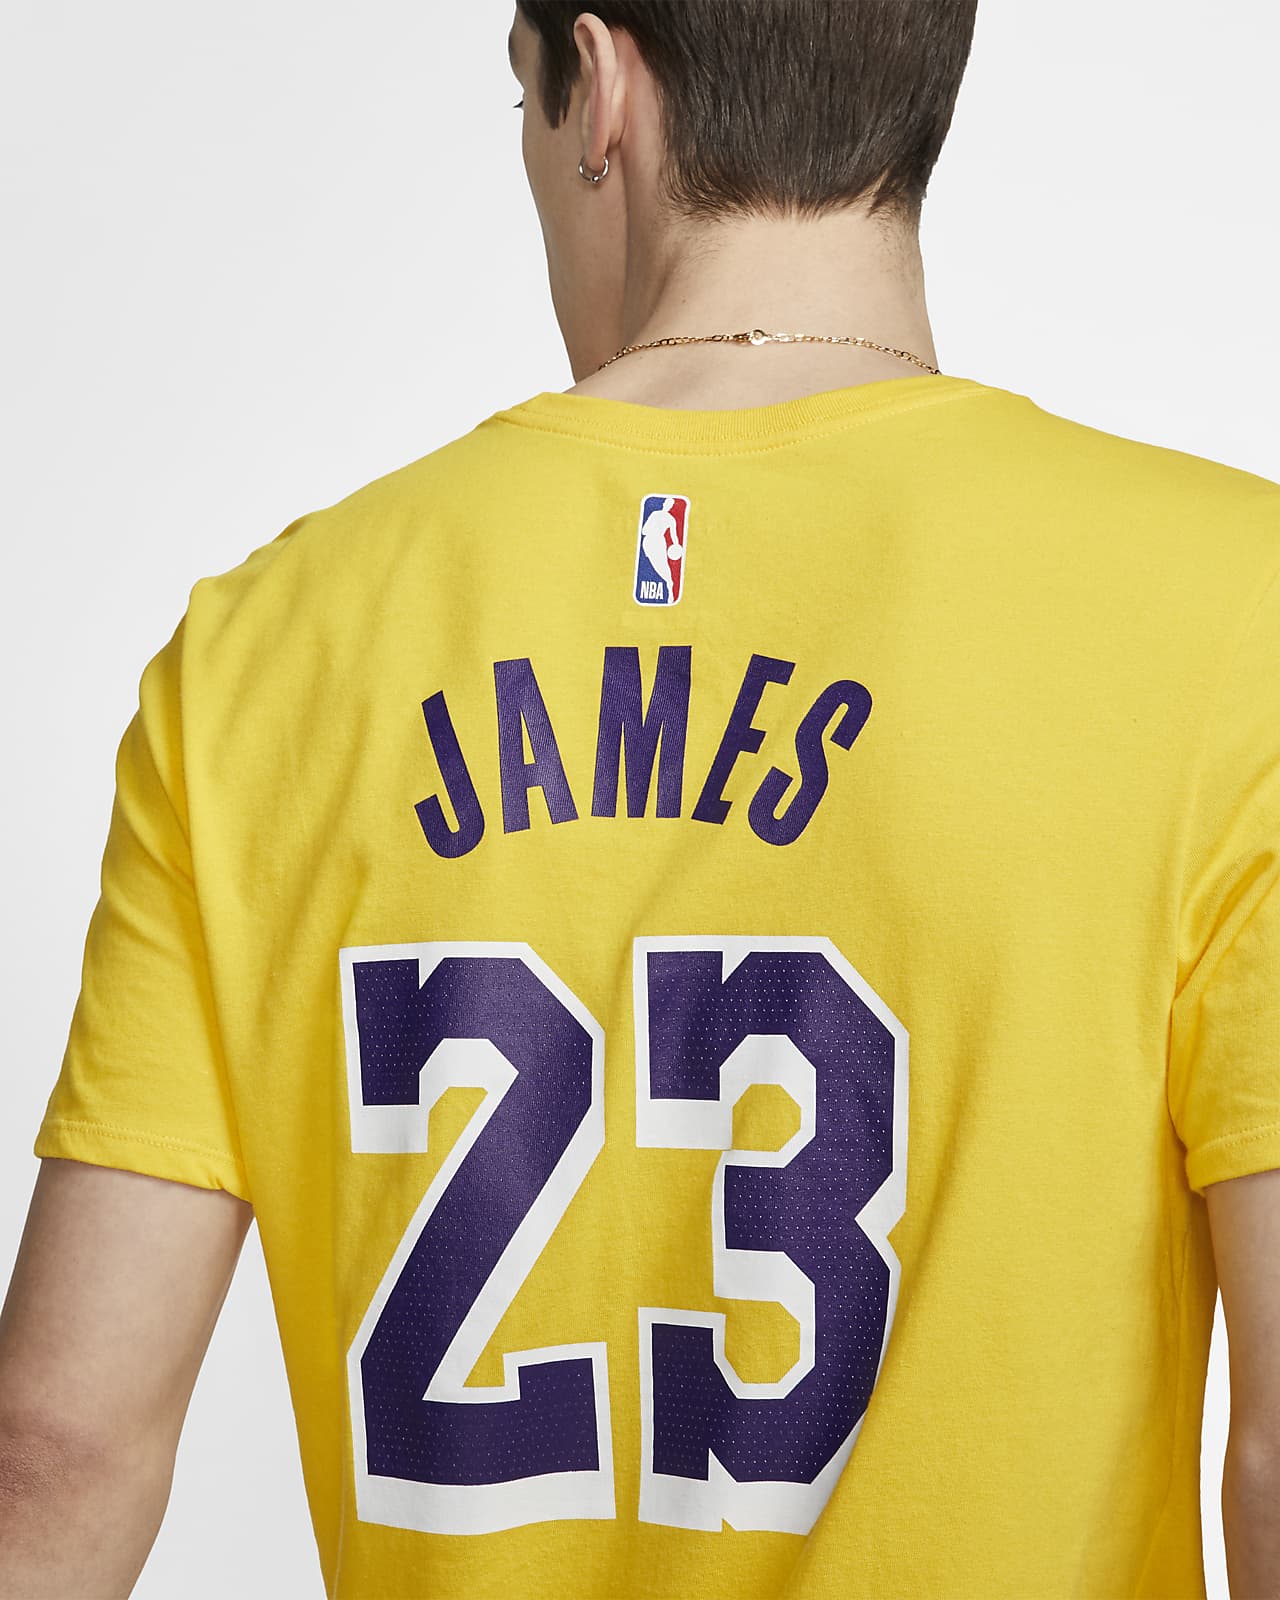 lebron james lakers jersey t shirt Off 55% - www.bashhguidelines.org